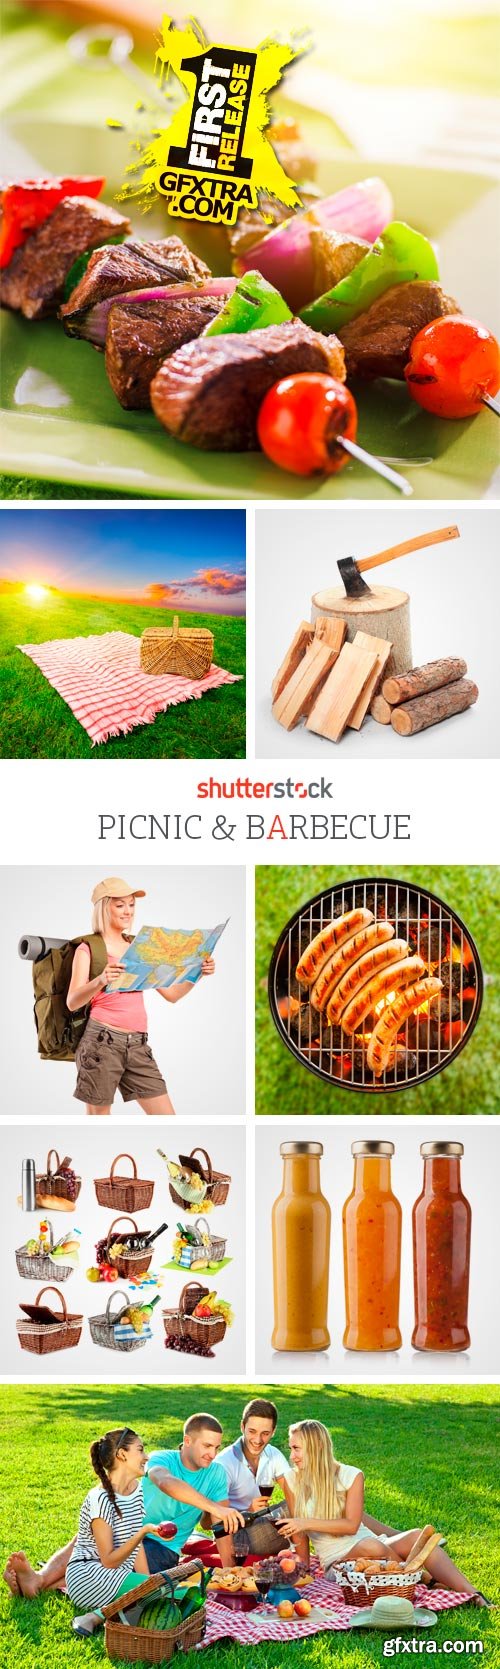 Amazing SS - Picnic & Barbecue, 25xJPGs